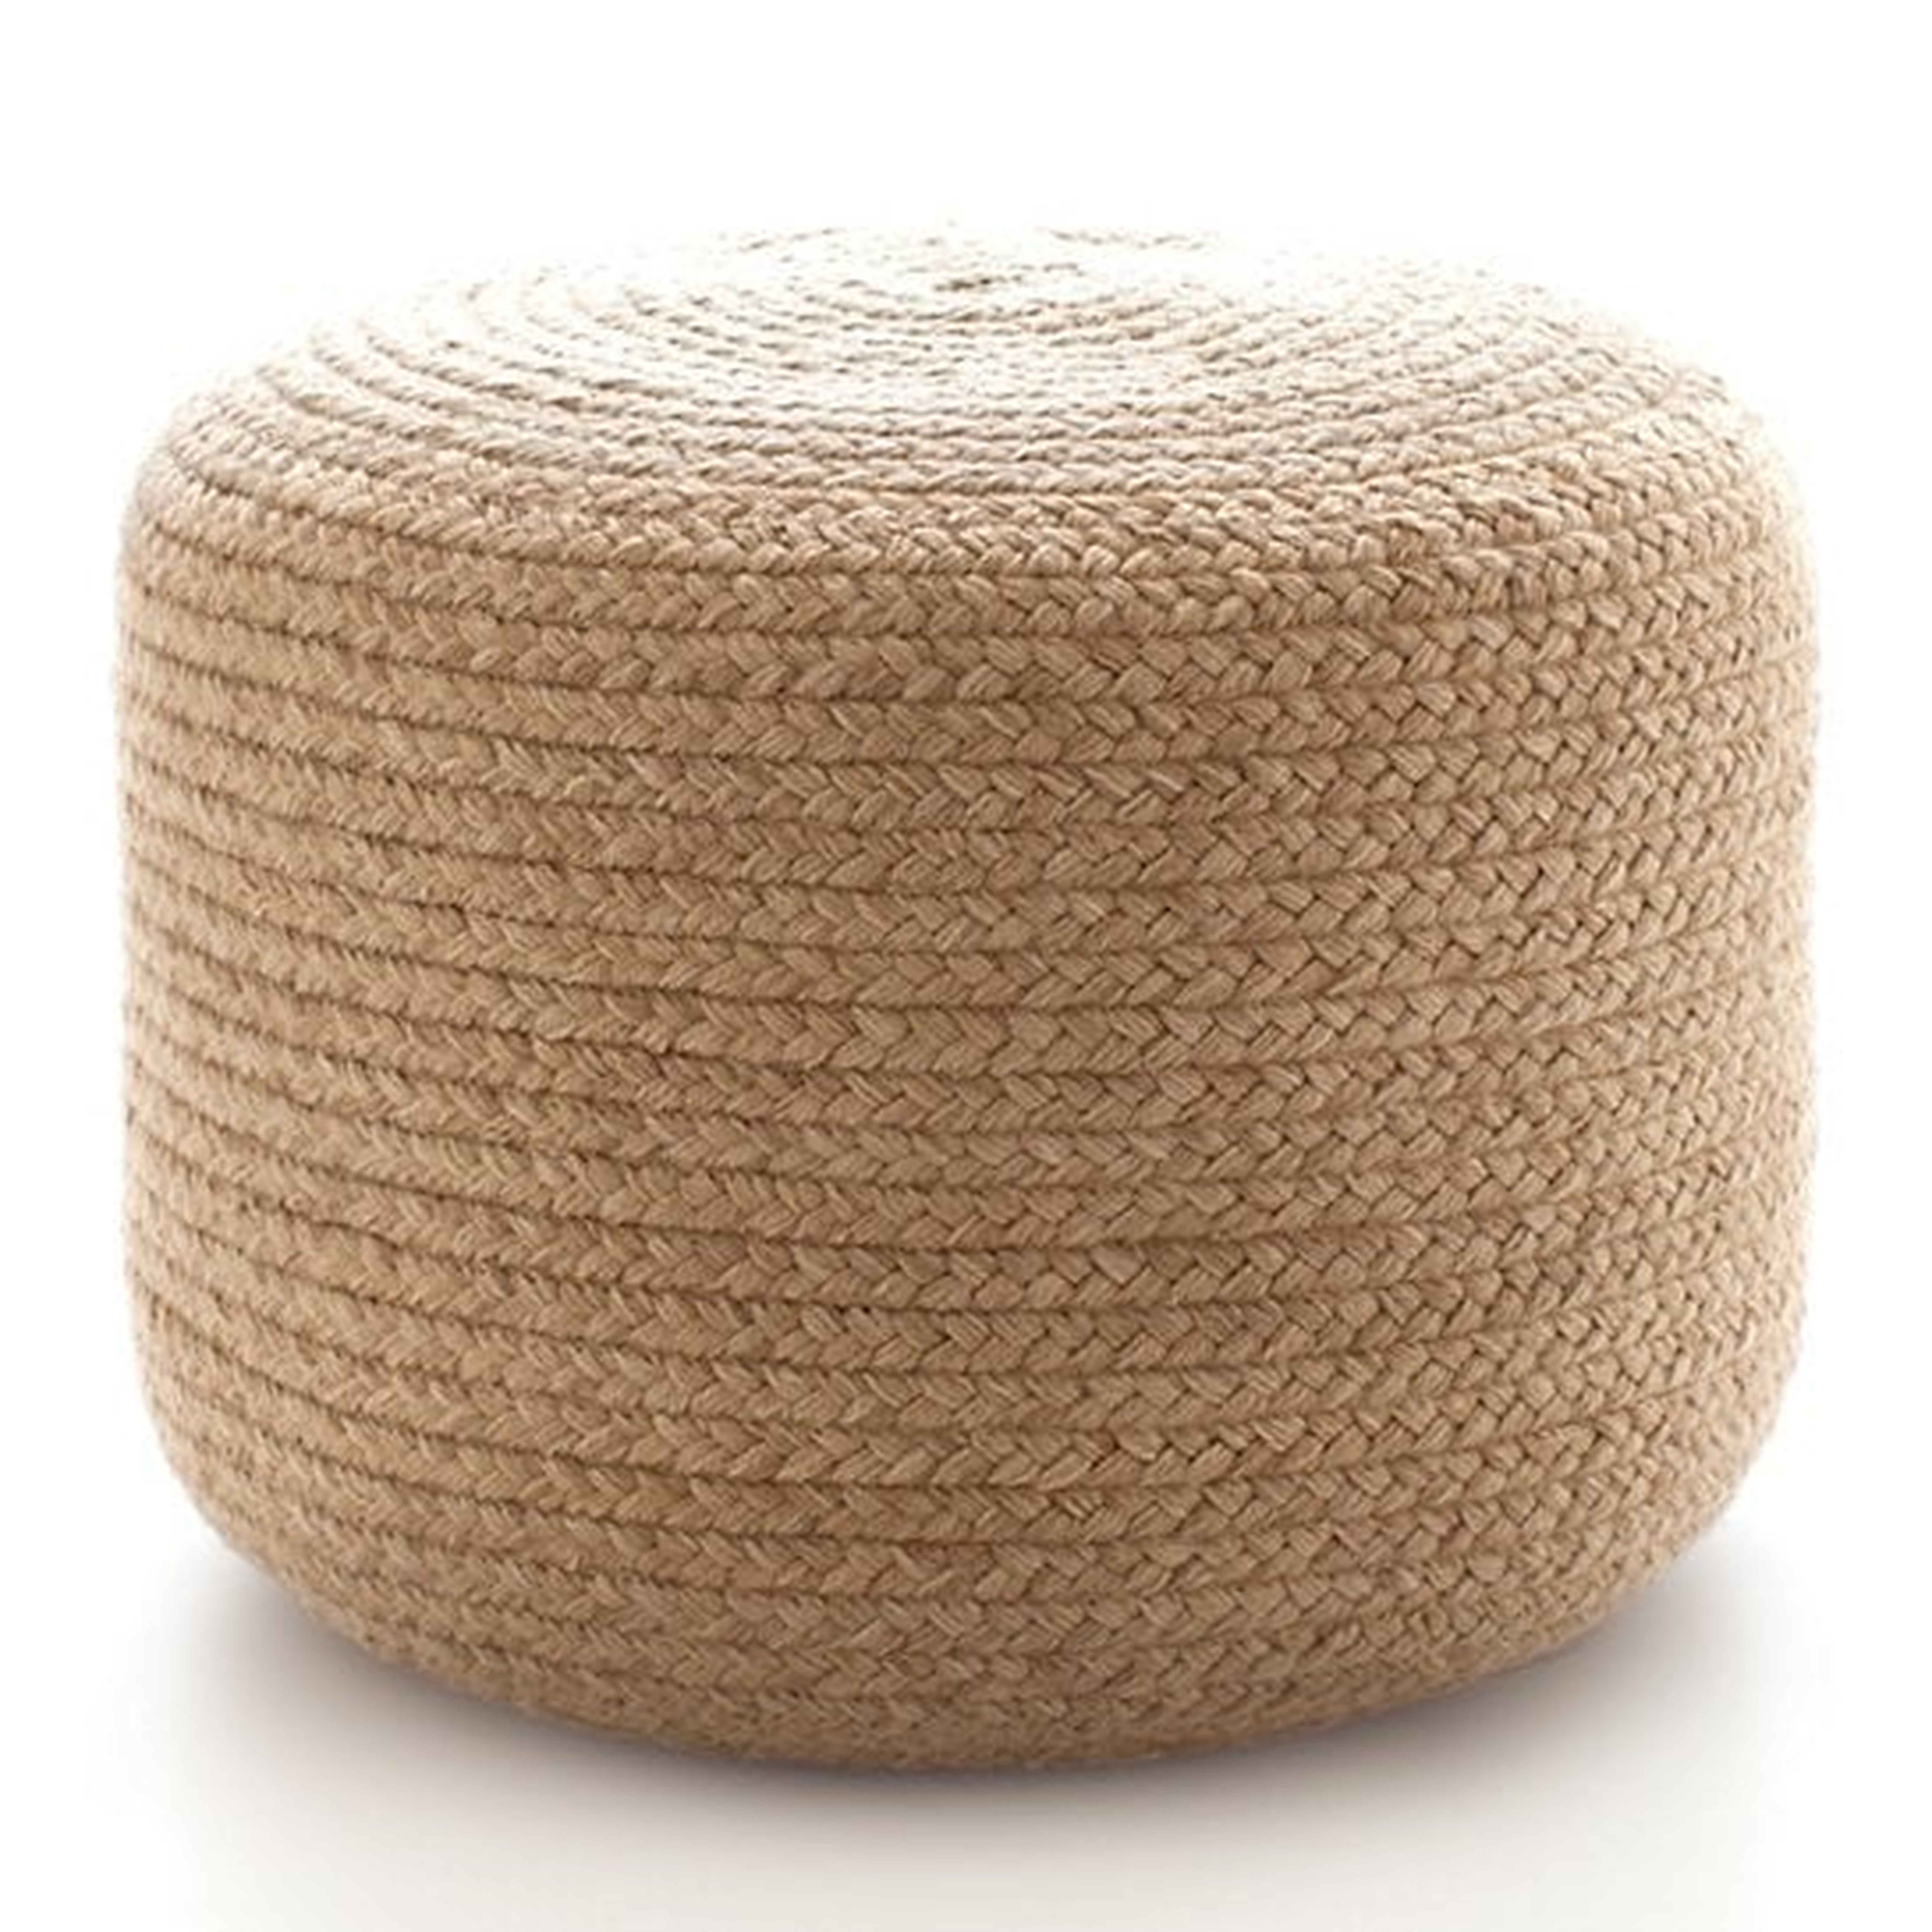 Braided Natural Indoor/Outdoor Pouf, Small - Dash and Albert